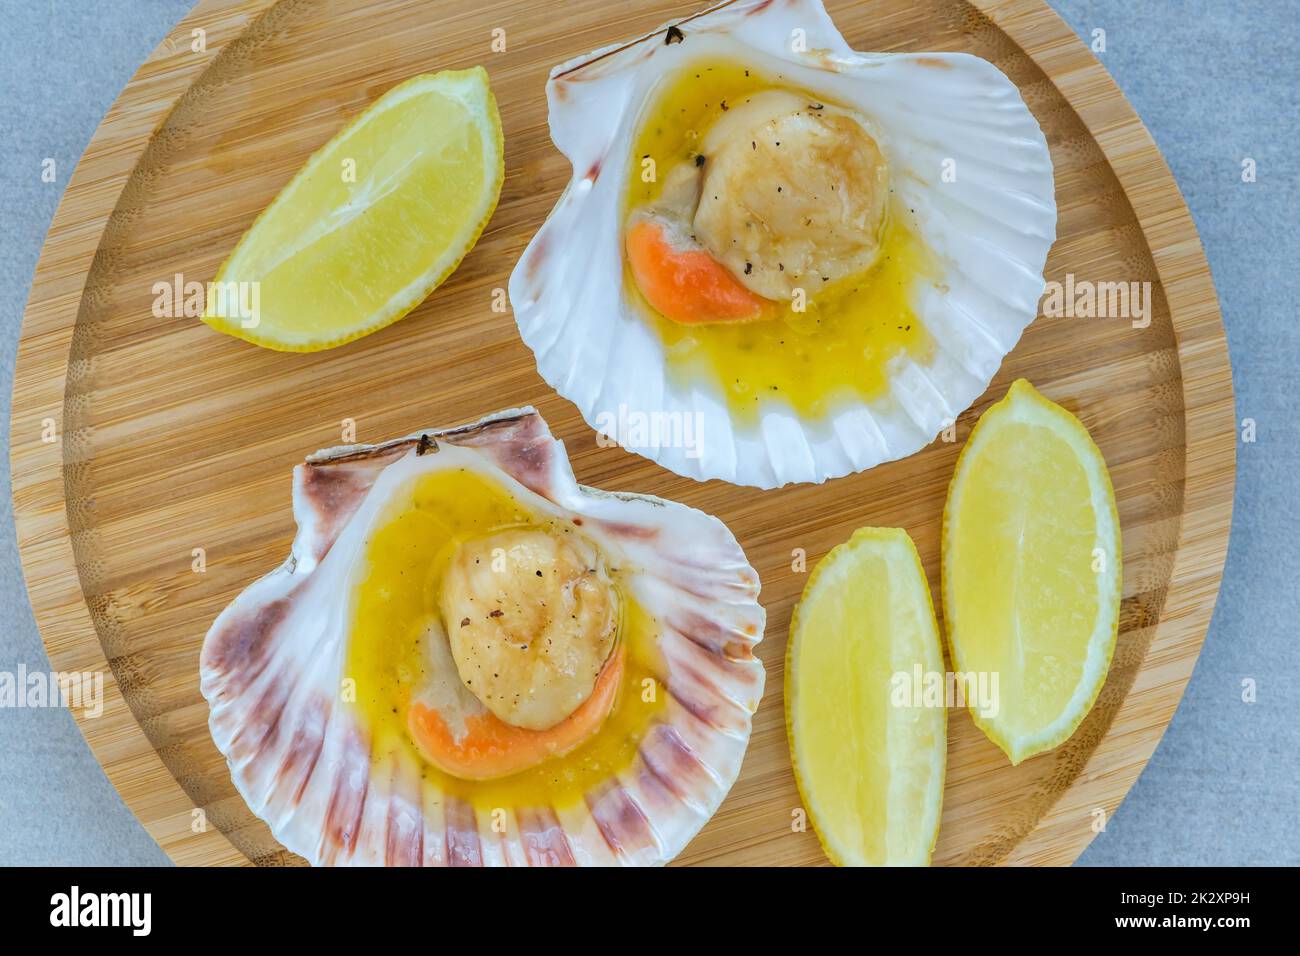 King scallop with roe and butter sauce in shell Stock Photo - Alamy